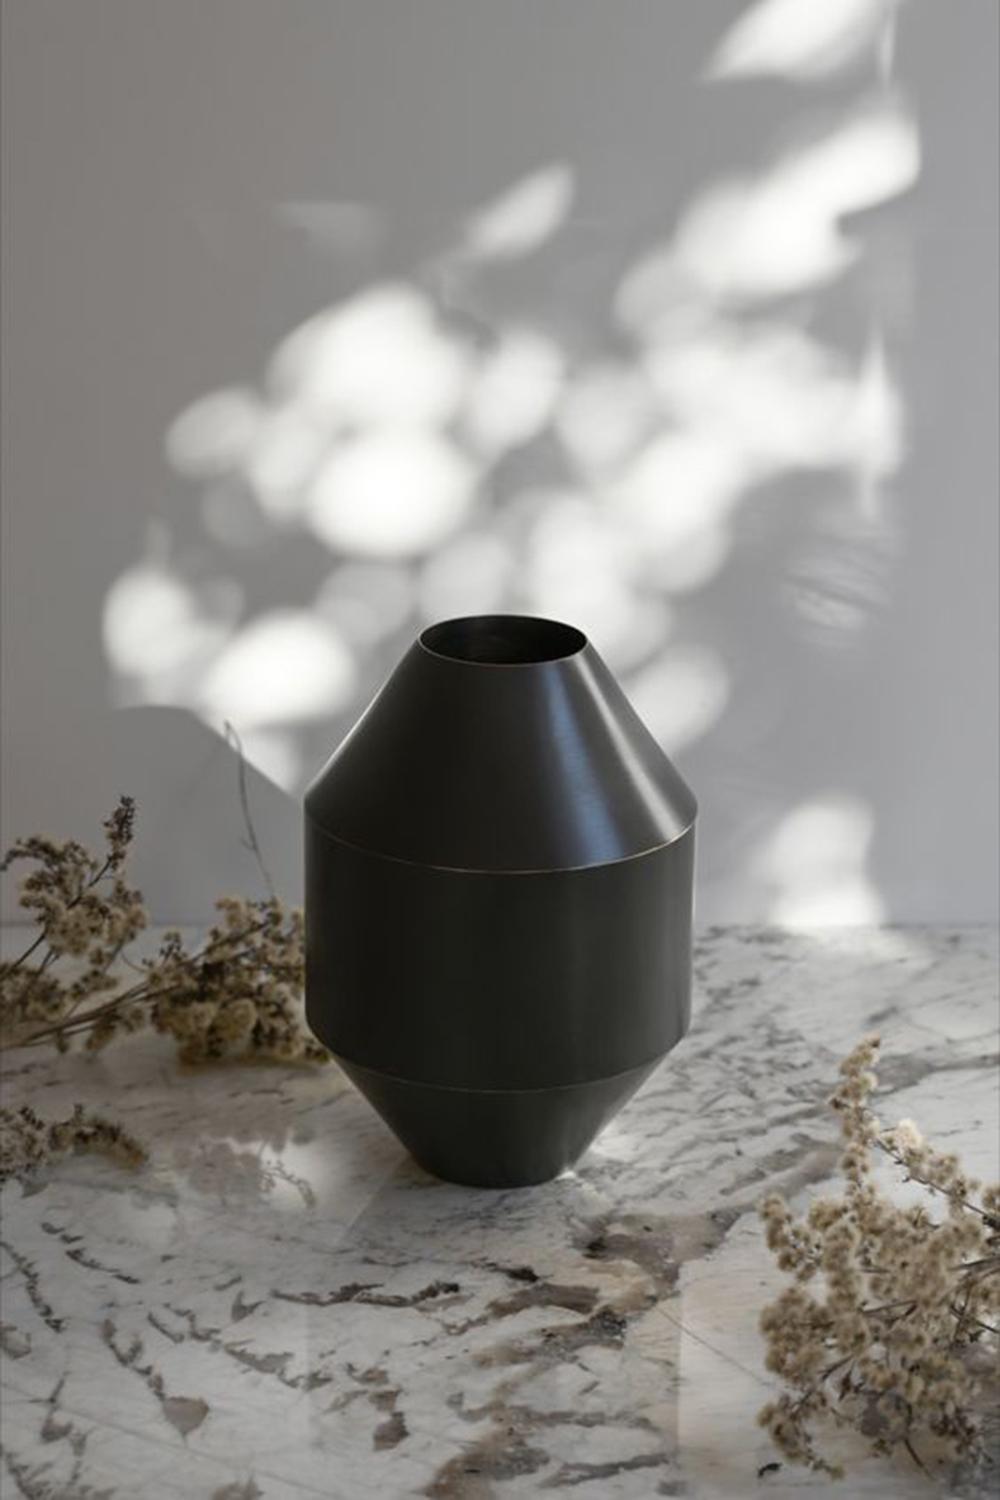 Referencing classic ceramic vases and ancient Greek vessels, the Hydro Vase makes a modern statement that incorporates the material properties and appeal of brass. Chosen because it can be shaped in ways that resemble iconic pottery, brass exudes